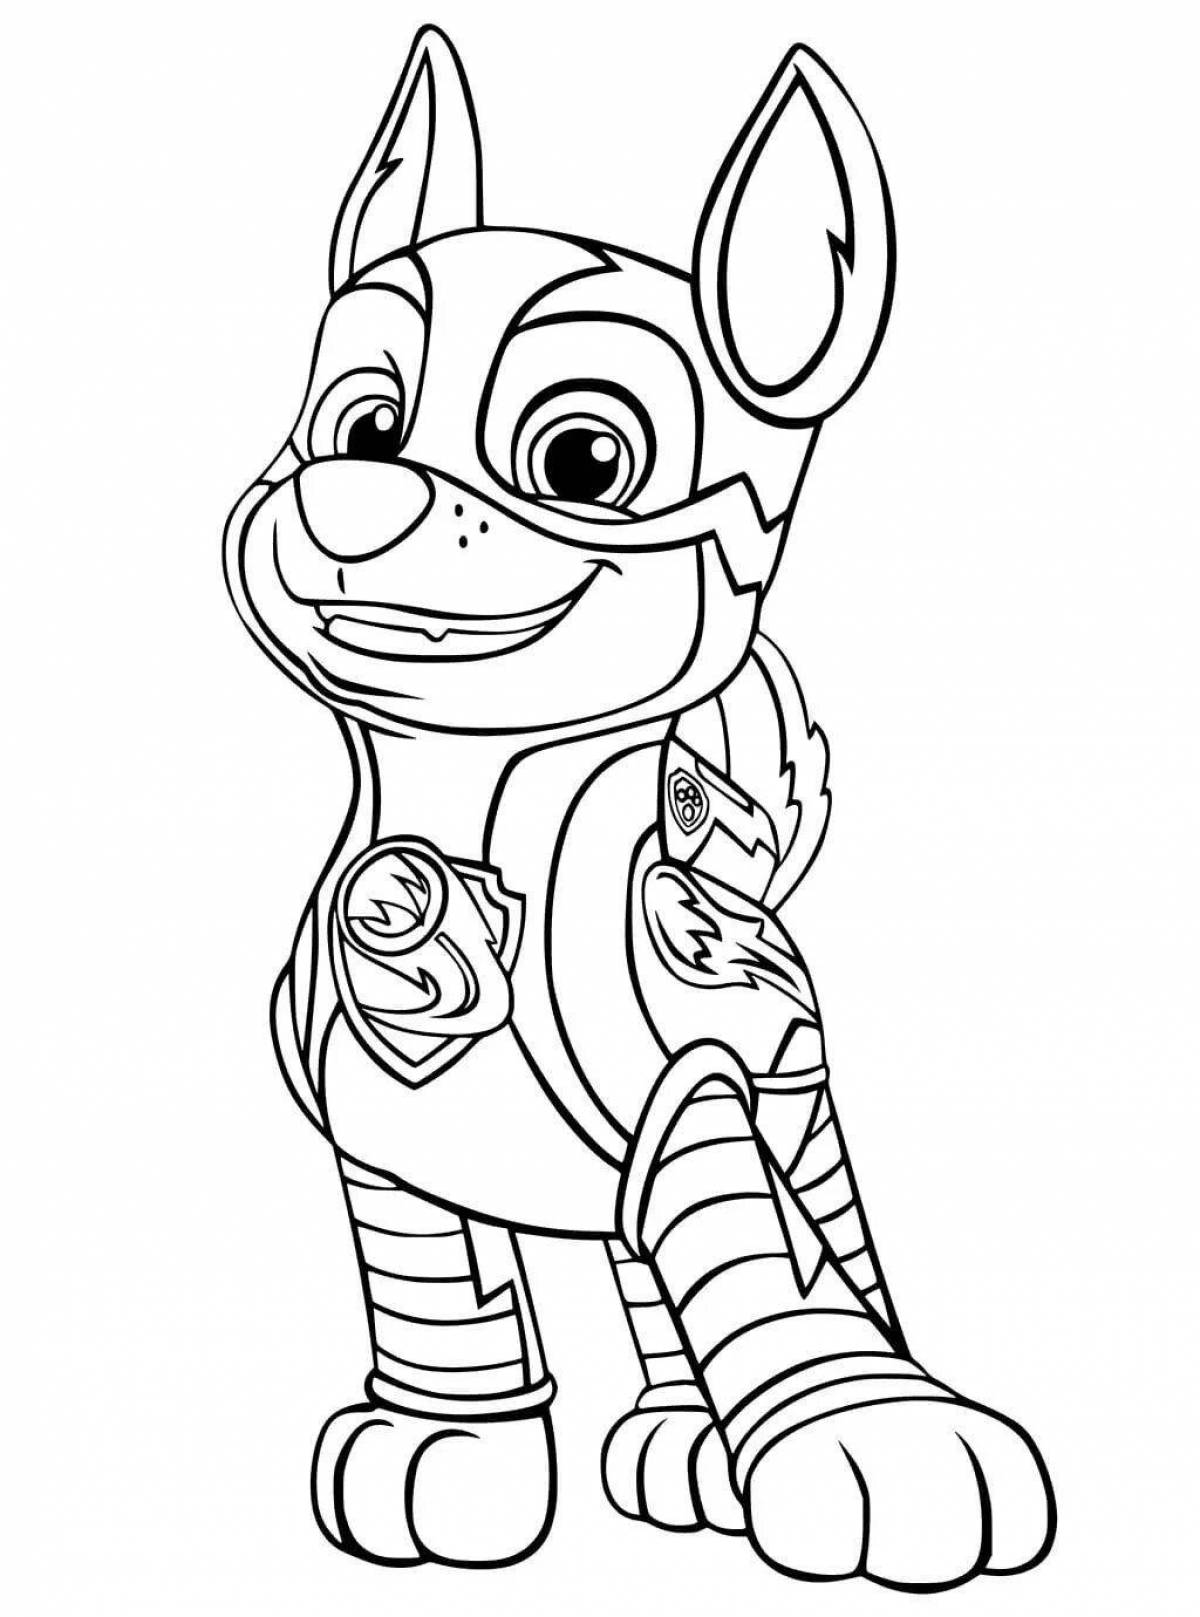 Coloring page brave racer